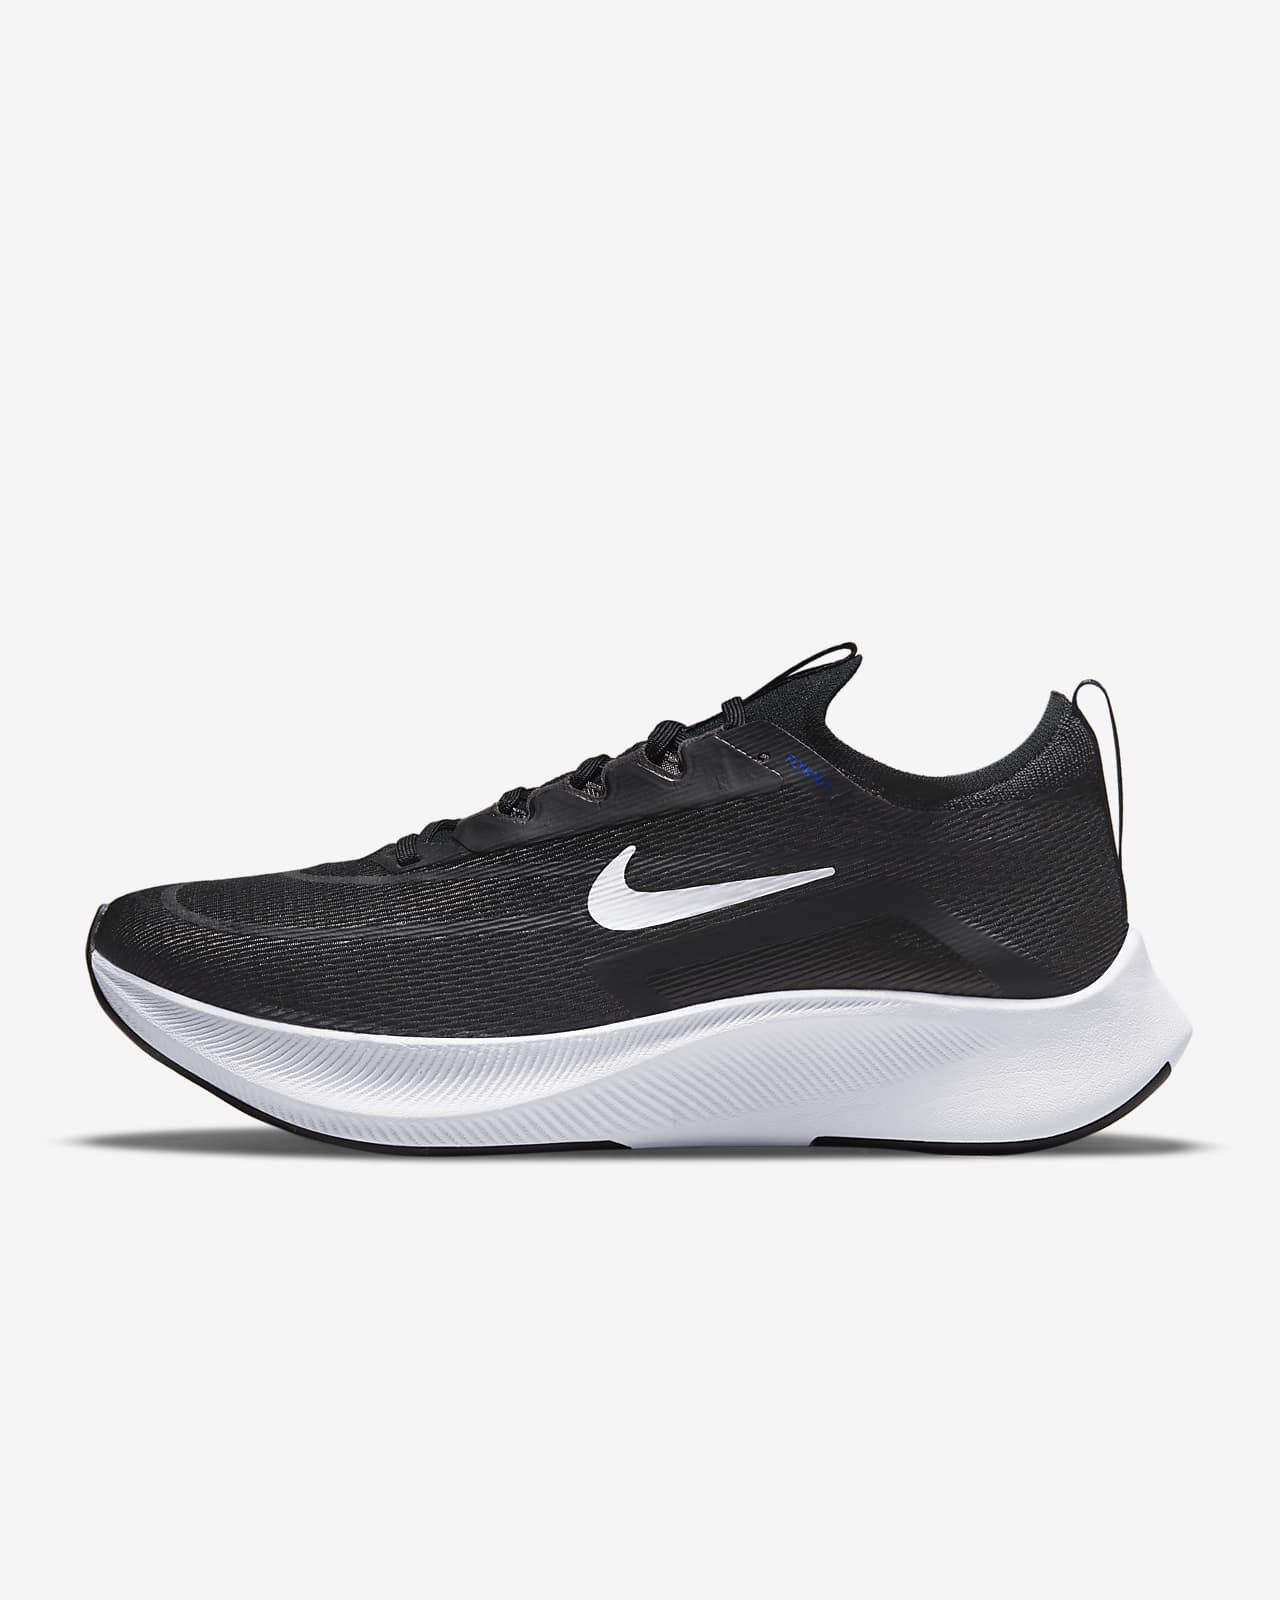 Chaussures de running sur route Nike Zoom Fly 4 pour Homme